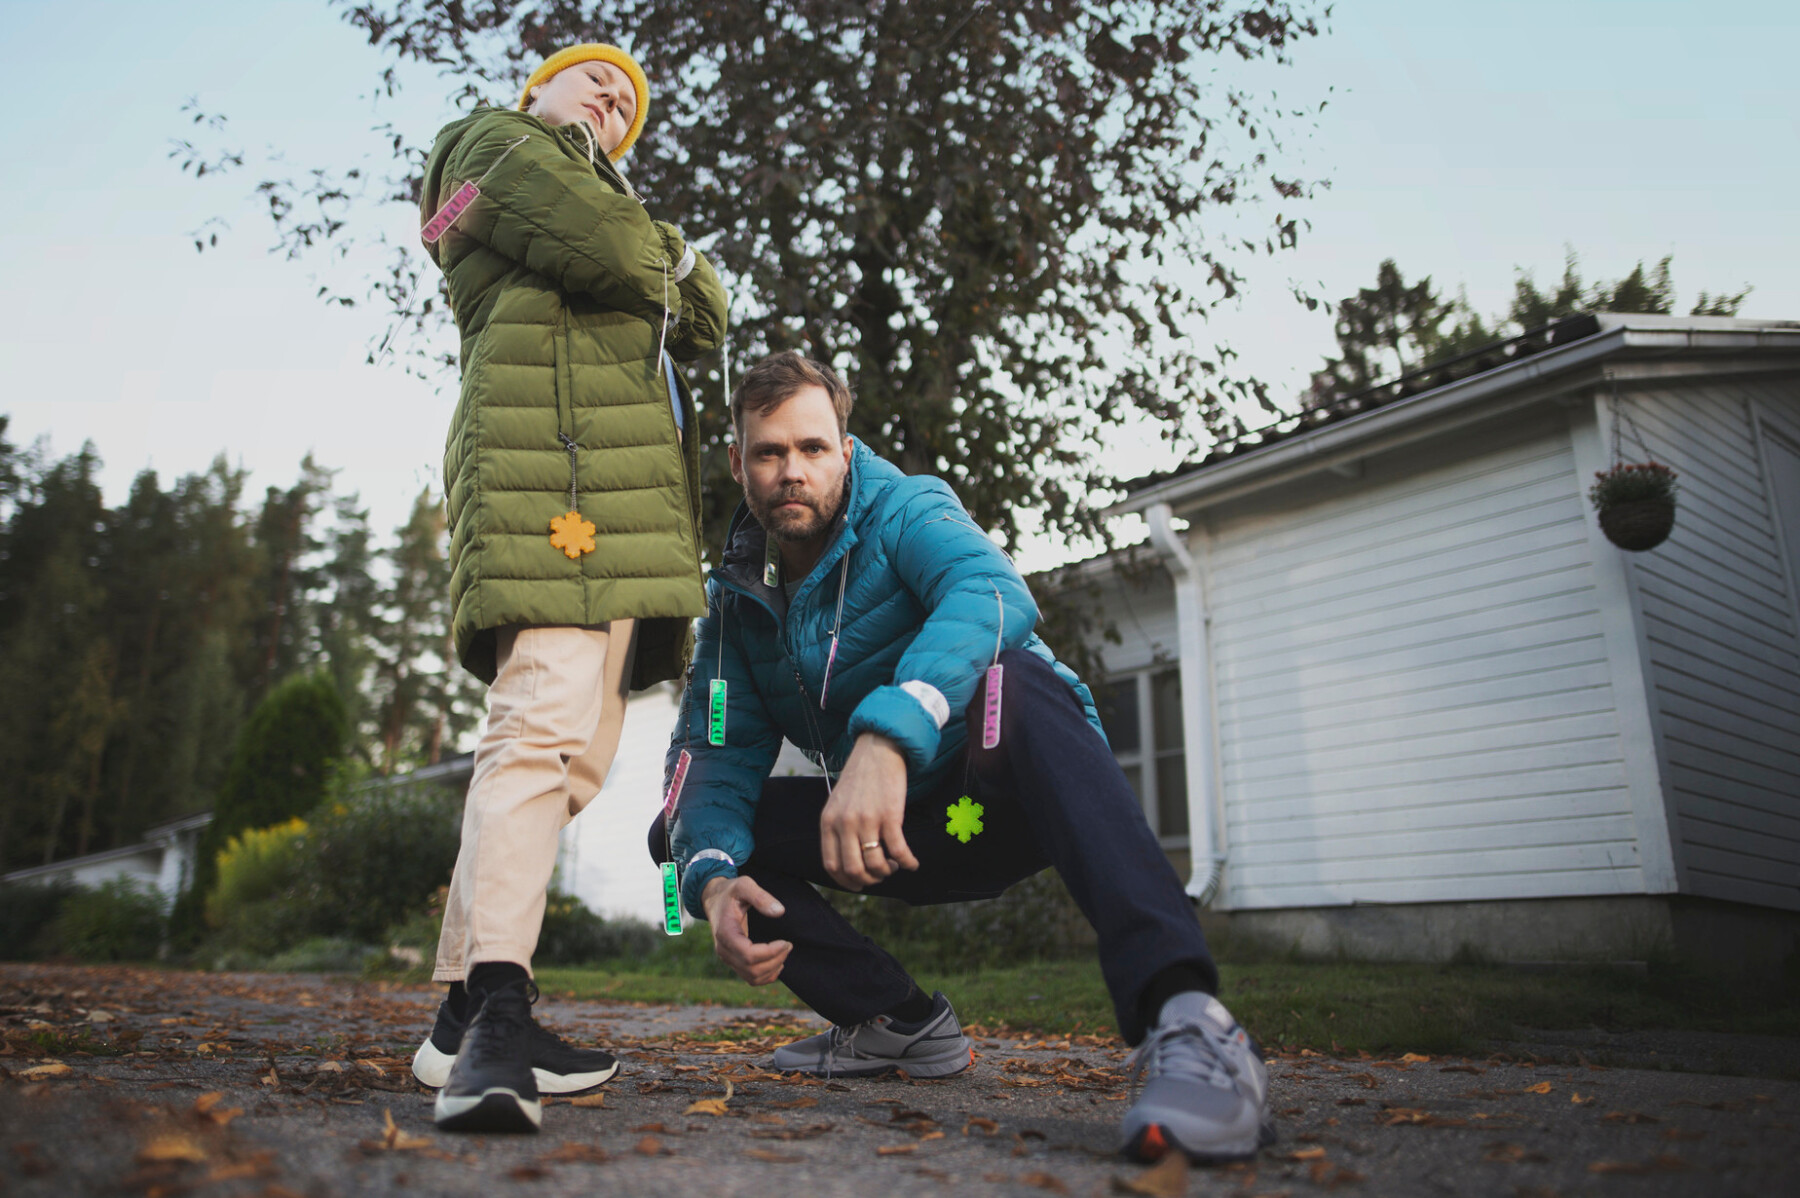 A man and a child in winter jackets, each with several plastic reflectors, are posing for the camera in the yard of a house.